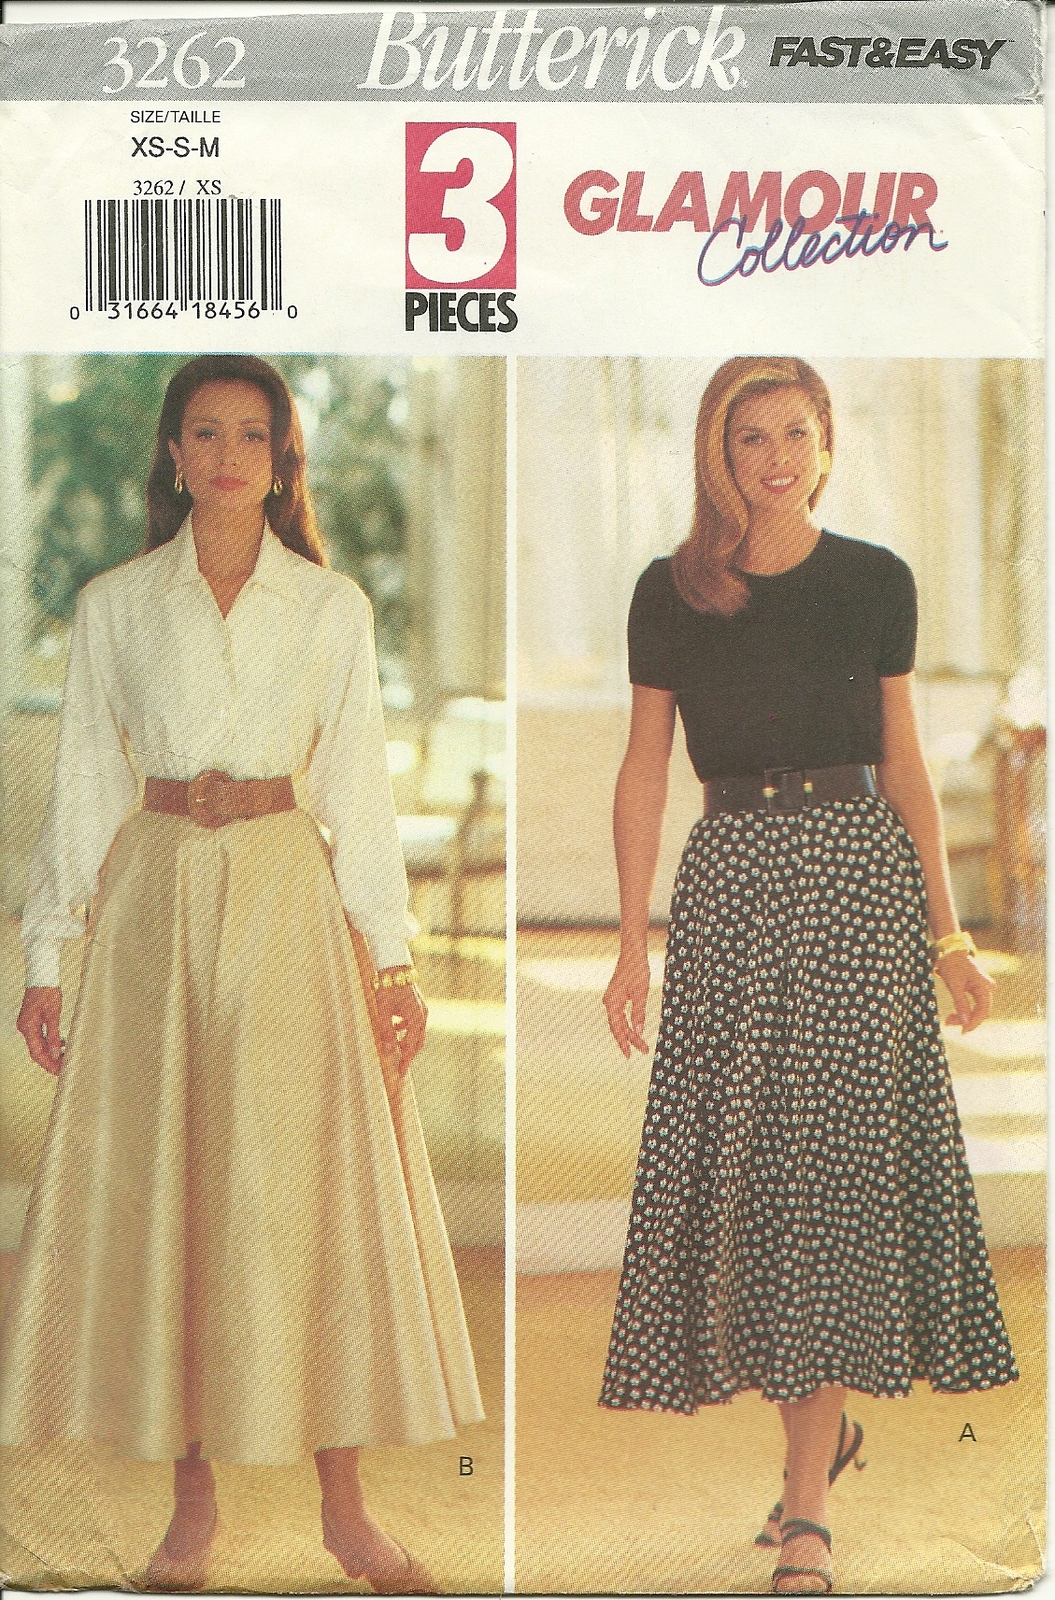 Butterick Sewing Pattern 3262 Misses Womens Flared Skirt Size 6 8 10 12 14 New - $9.99